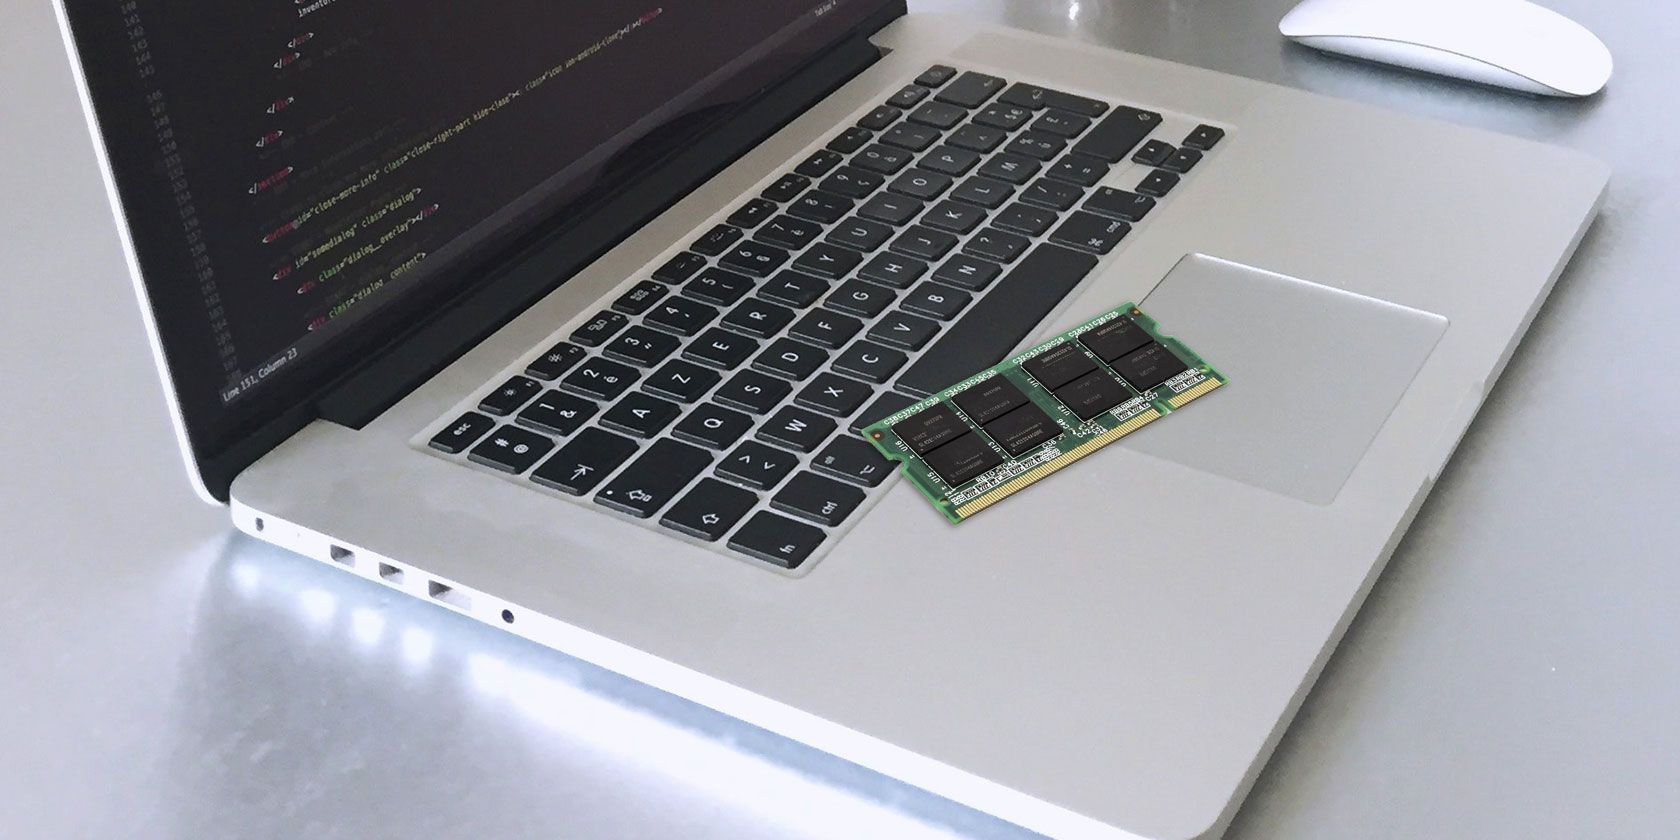 How to Add or Upgrade RAM on Your Mac